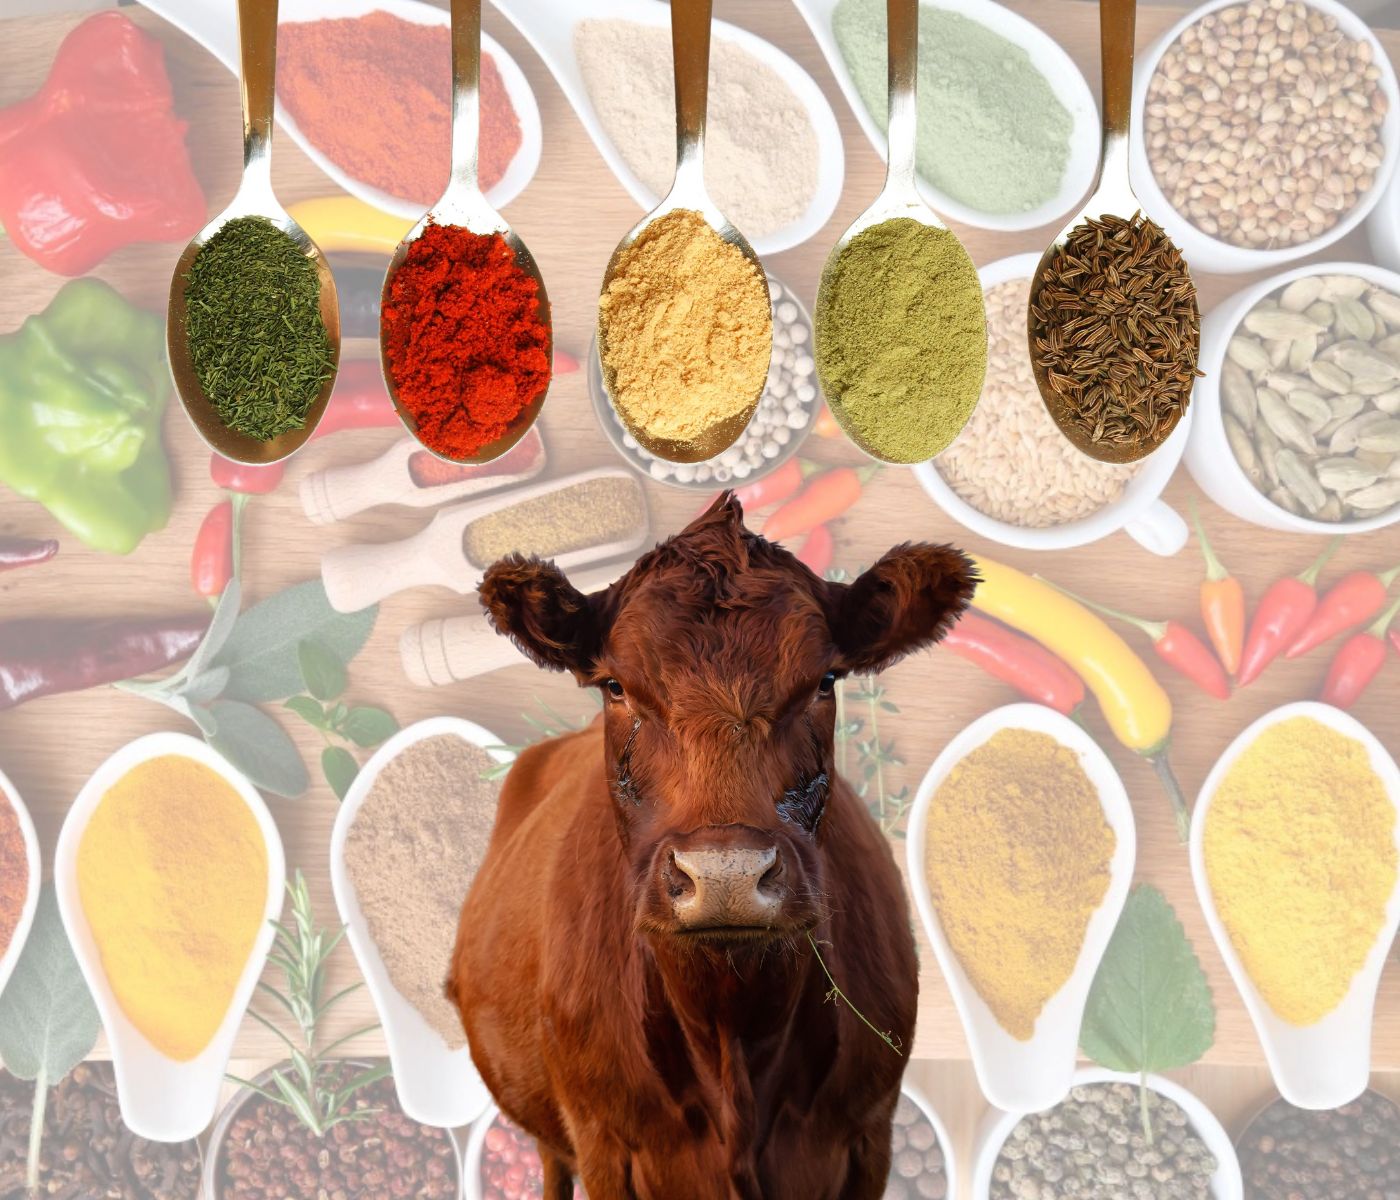 Nutritional additives and their effects on ruminant nutrition